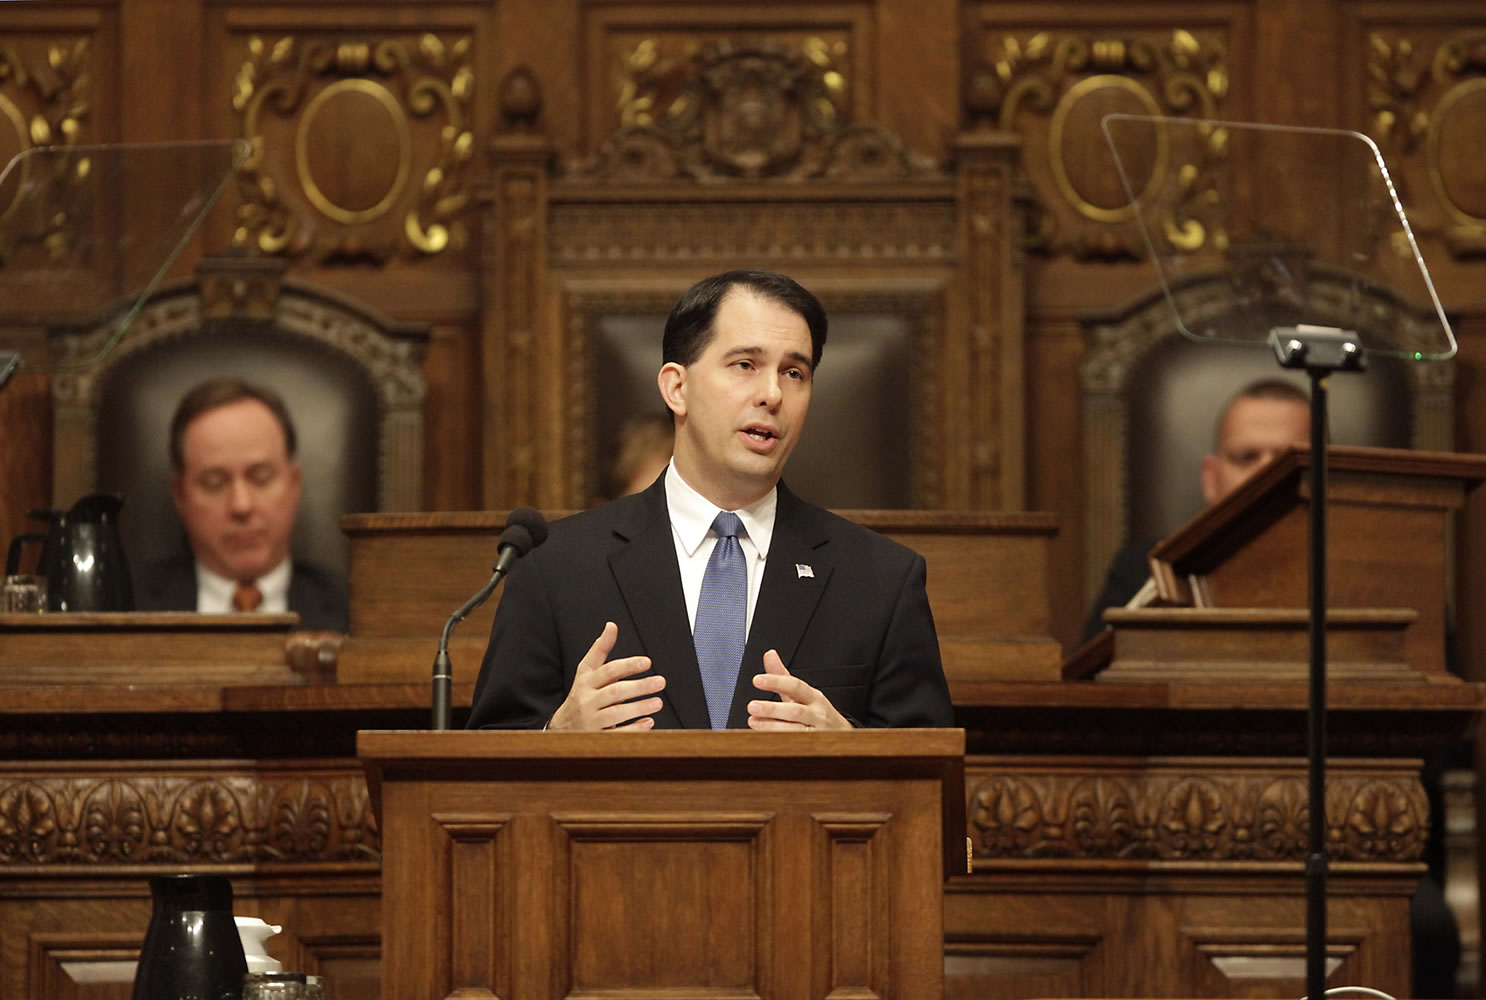 Wisconsin Governor Scott Walker delivers his state budget address in the Assembly chamber of the Wisconsin State Capitol in Madison. The potential GOP presidential candidate says a shutdown of the federal government would violate government's chief responsibility to run, and run efficiently.